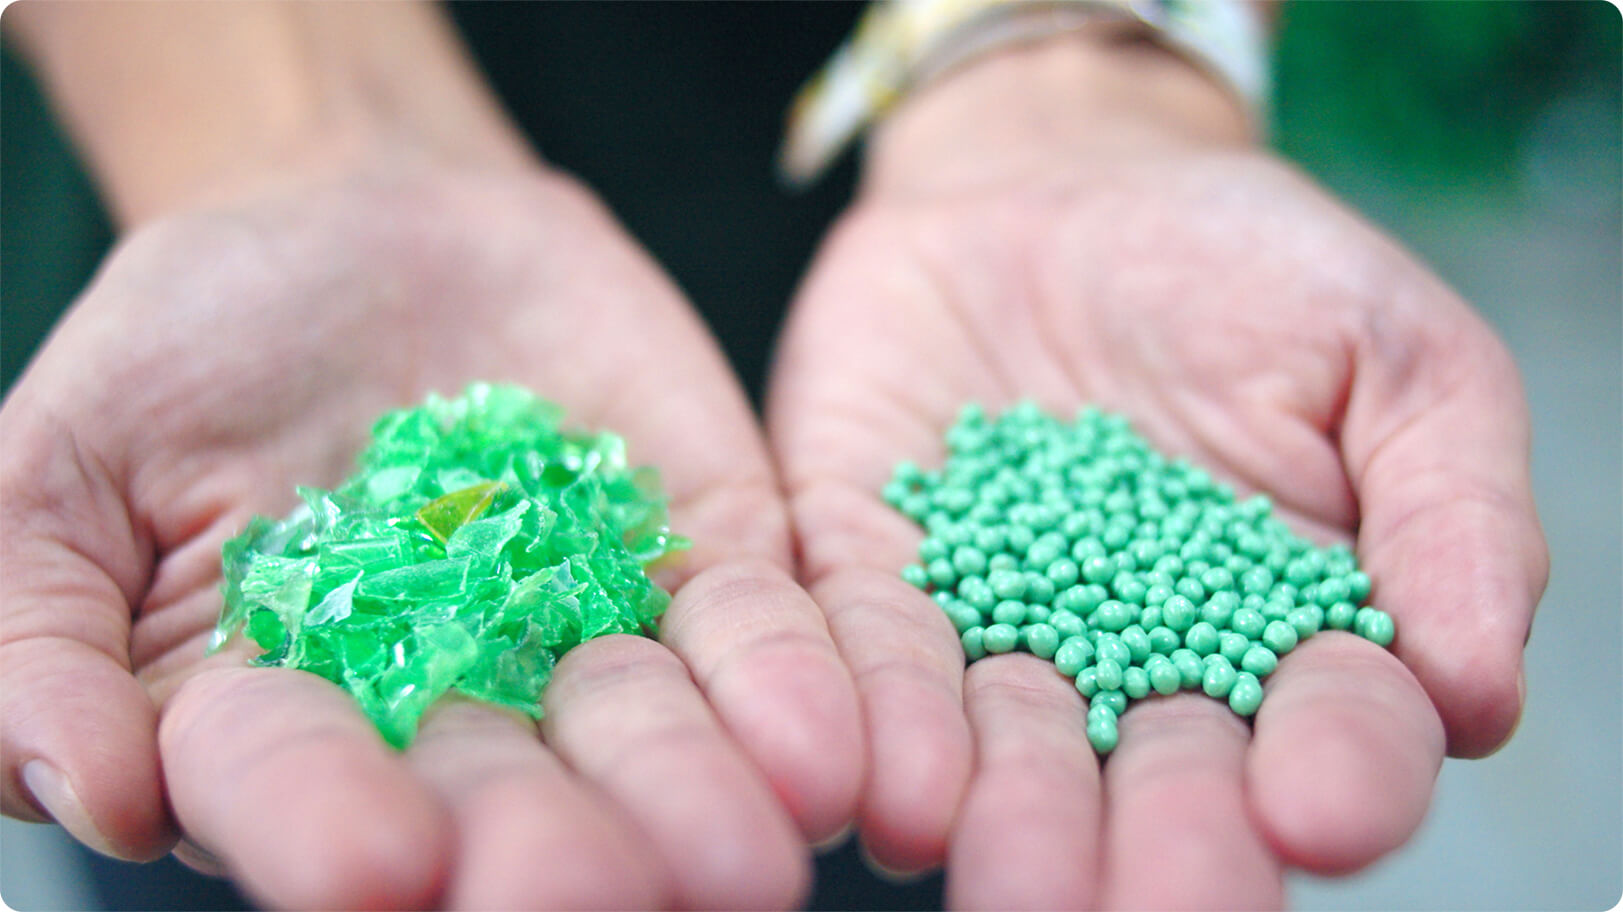 Recycled plastic in 2 forms. Green Pellets and green flakes